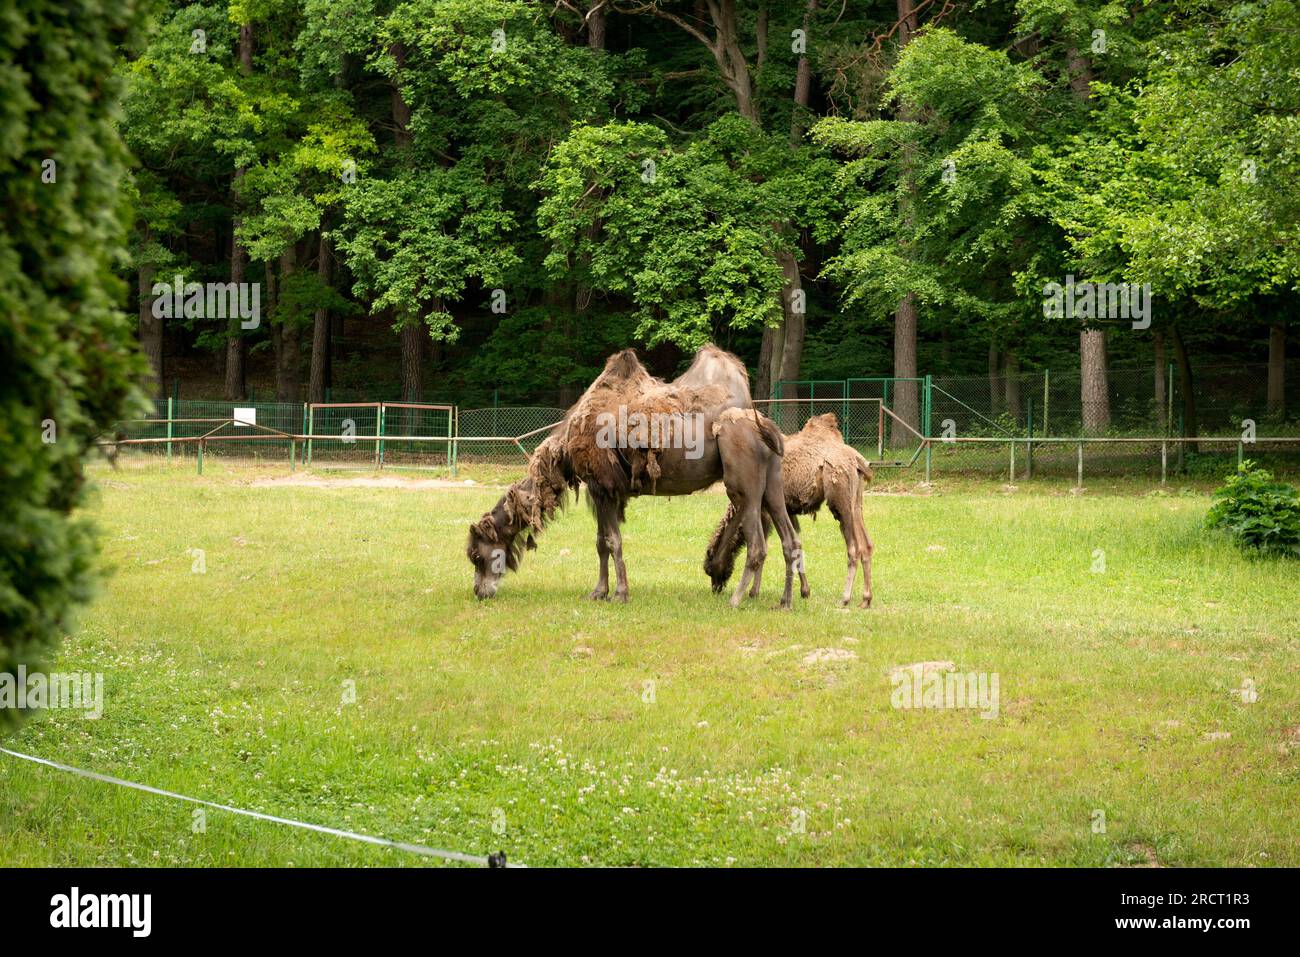 Adult Bactrian Camel or Camelus bactrianus and calf two-humped camels grazing in the Gdansk Zoo, Gdansk, Poland Stock Photo